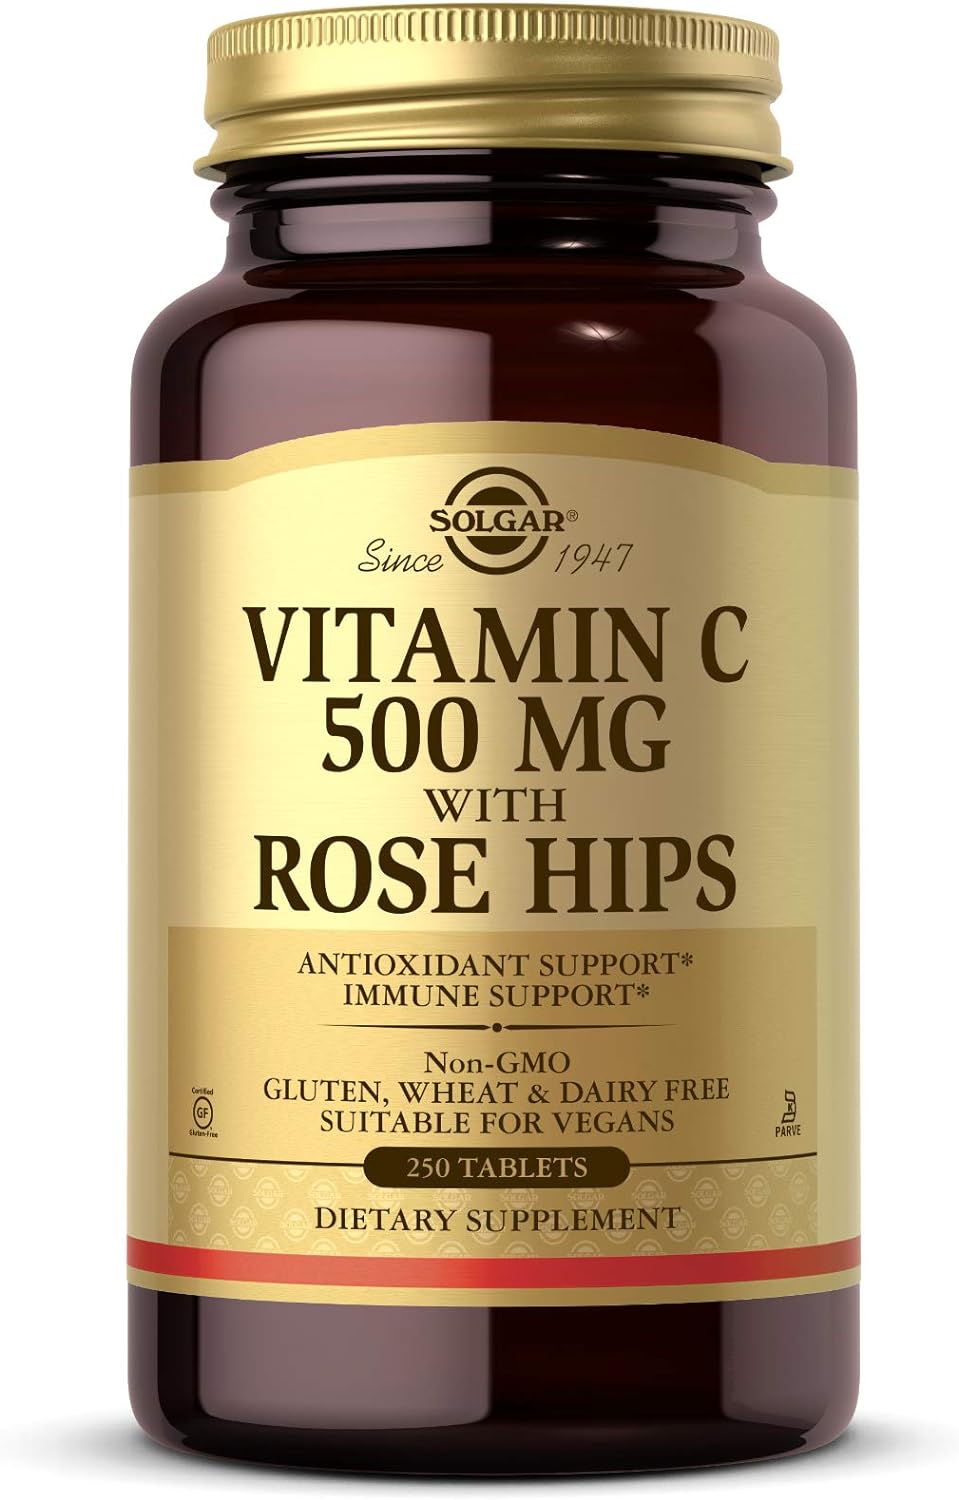 Solgar Vitamin C 500 mg with Rose Hips, 250 Tablets - Antioxidant & Immune Support - Overall Health - Supports Healthy Skin & Joints - Non GMO, Vegan, Gluten Free, Dairy Free, Kosher - 250 Servings